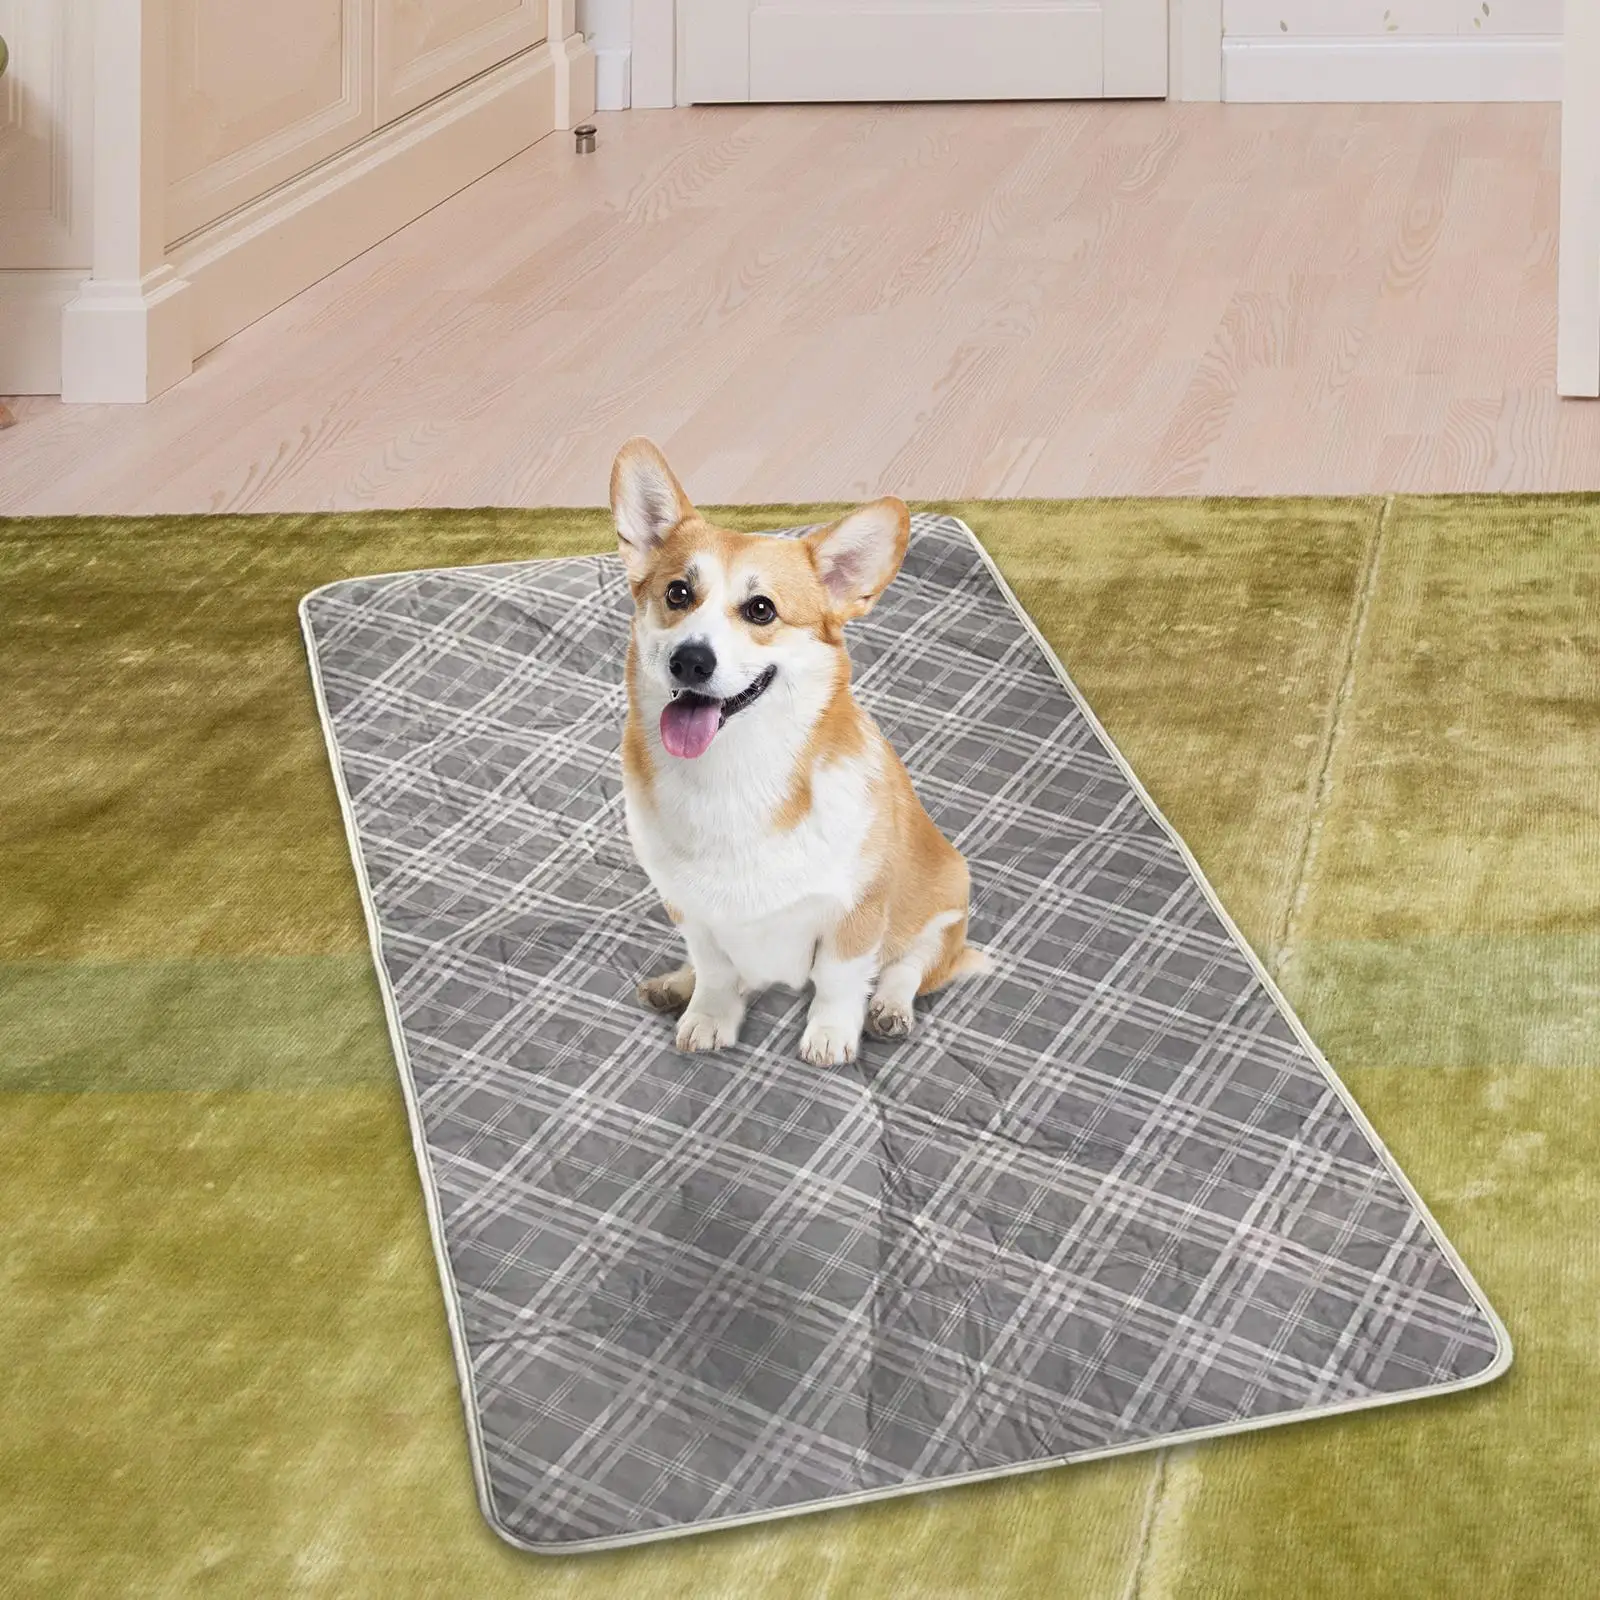 Pet Dog Pee Pad Cat Mat Kitten Washable Reusable Cushion Blanket for Crate Outdoor Sleeping Pad Home Travel Cage Supplies